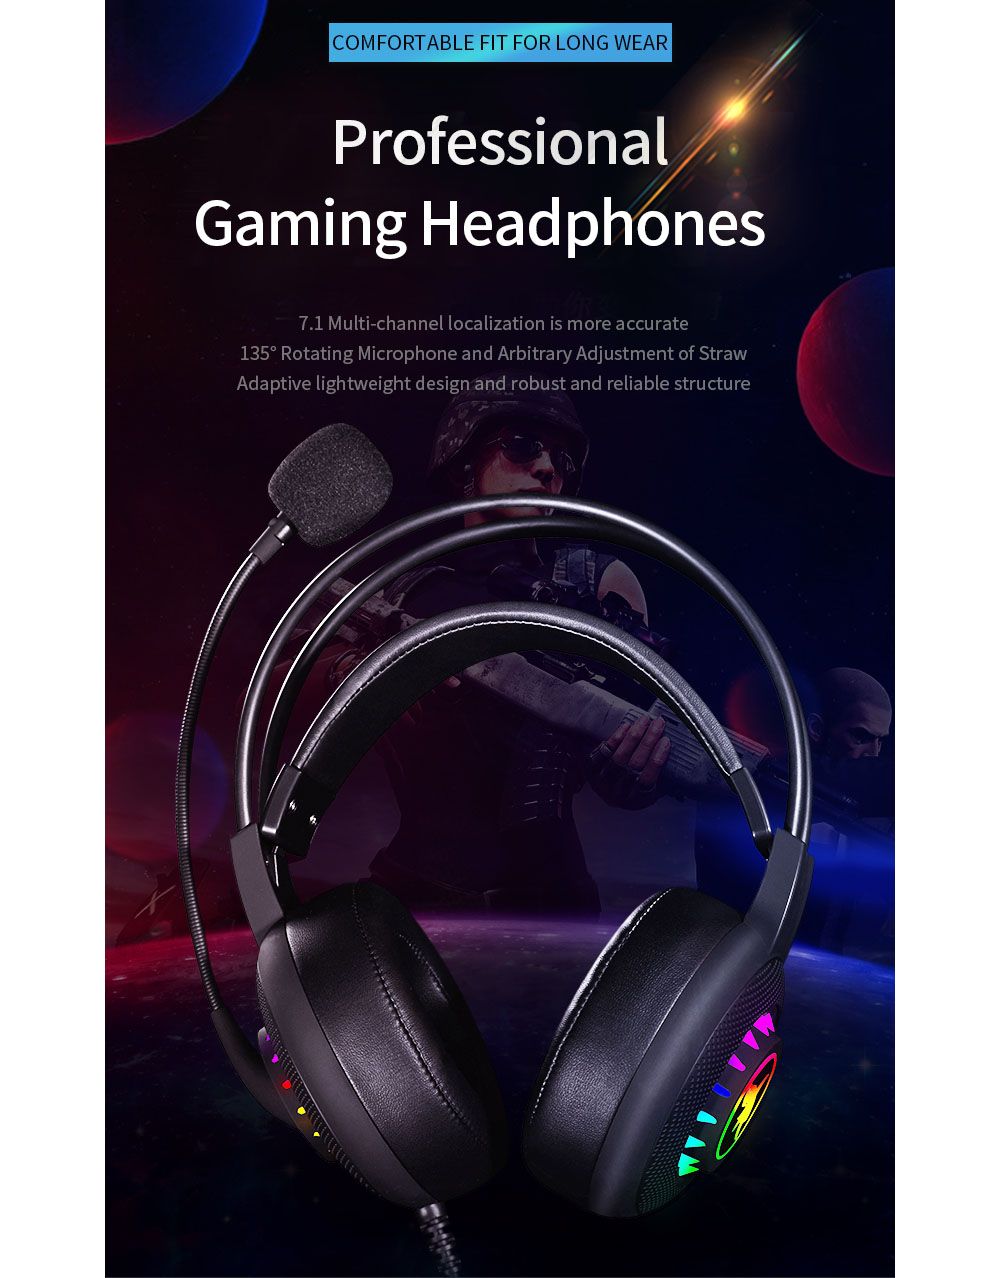 G50-Gaming-Headset-Wired-Luminous-Free-Drive-71-Virtual-Stereo-Surround-Sound-RGB-Light-Noise-Reduct-1753041